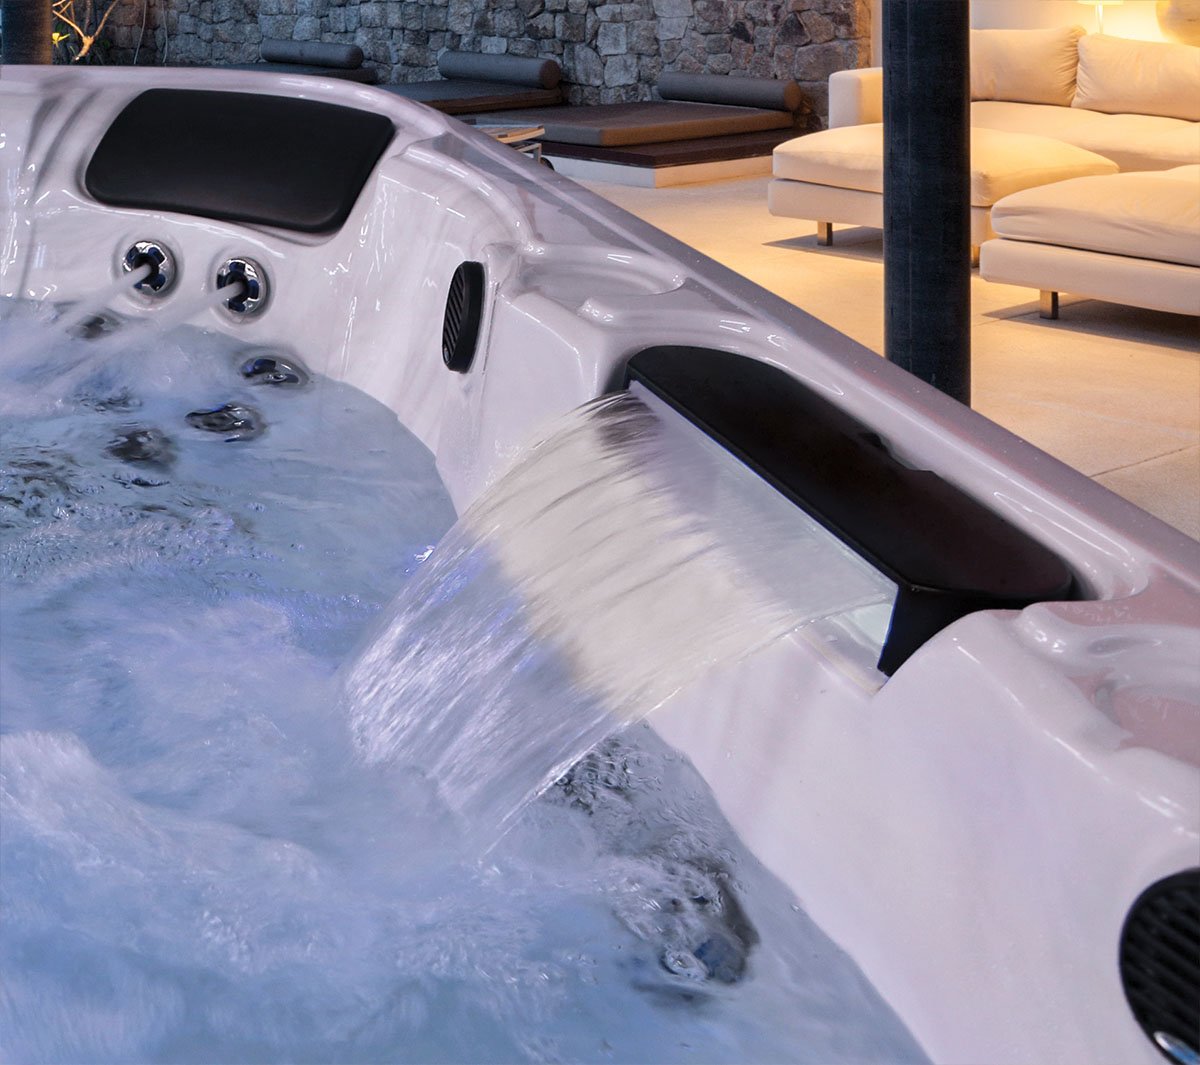   Relaxing Luxury   Stop by our showroom to see a wide variety of spas. From a cozy four-person to a party tub, we can find the right fit for you and your budget. 